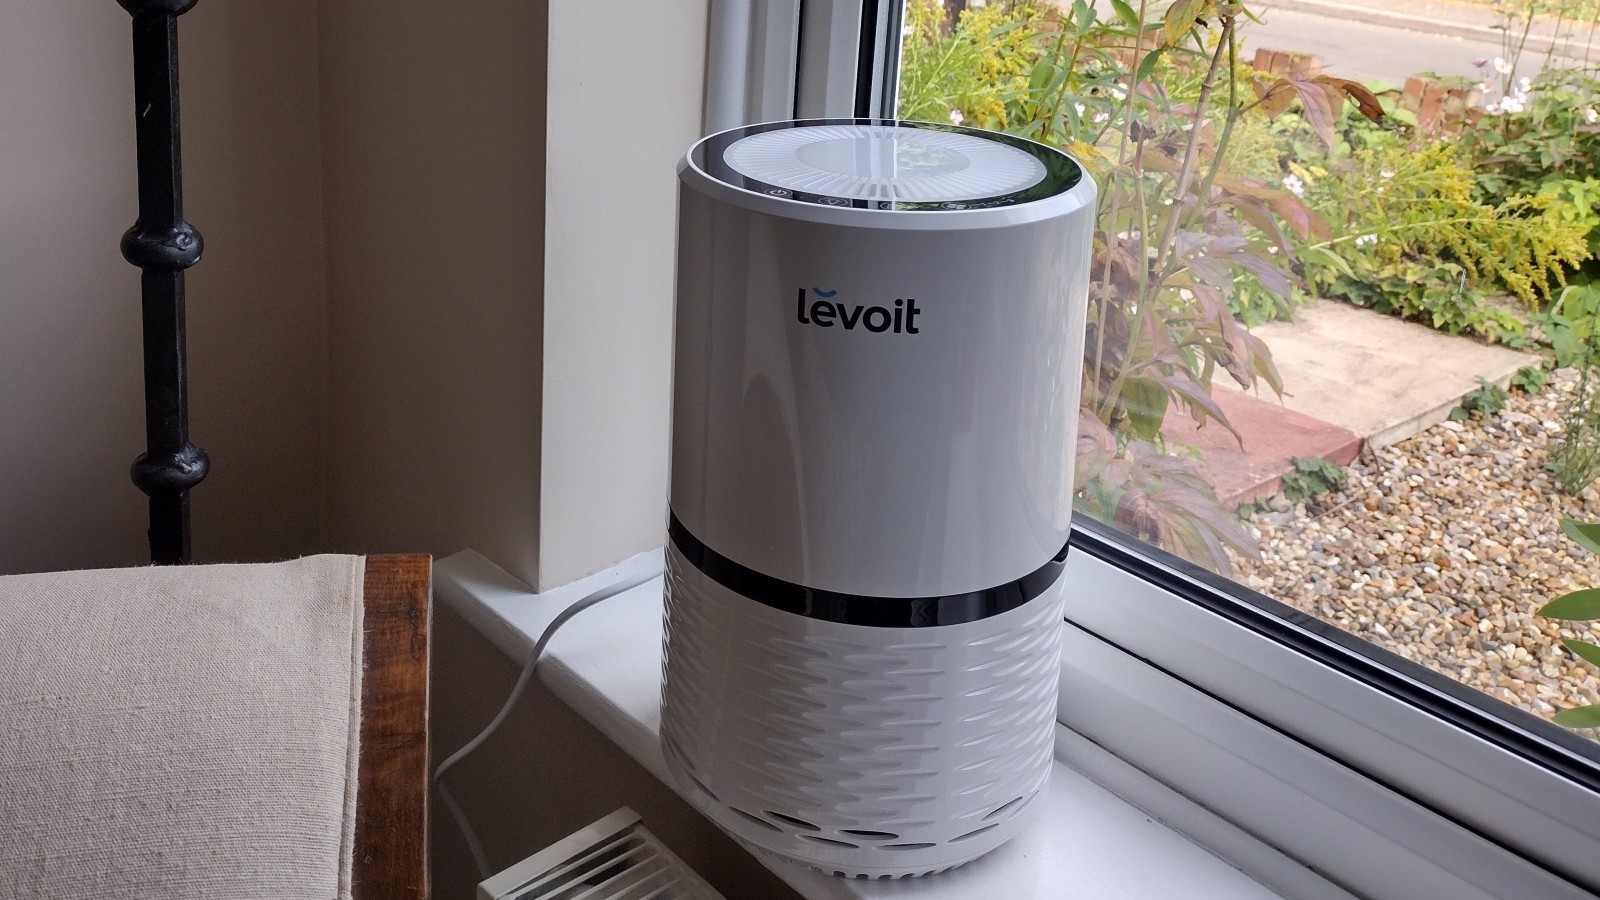 Levoit H132: Image shows the air purifier on a windowsill.